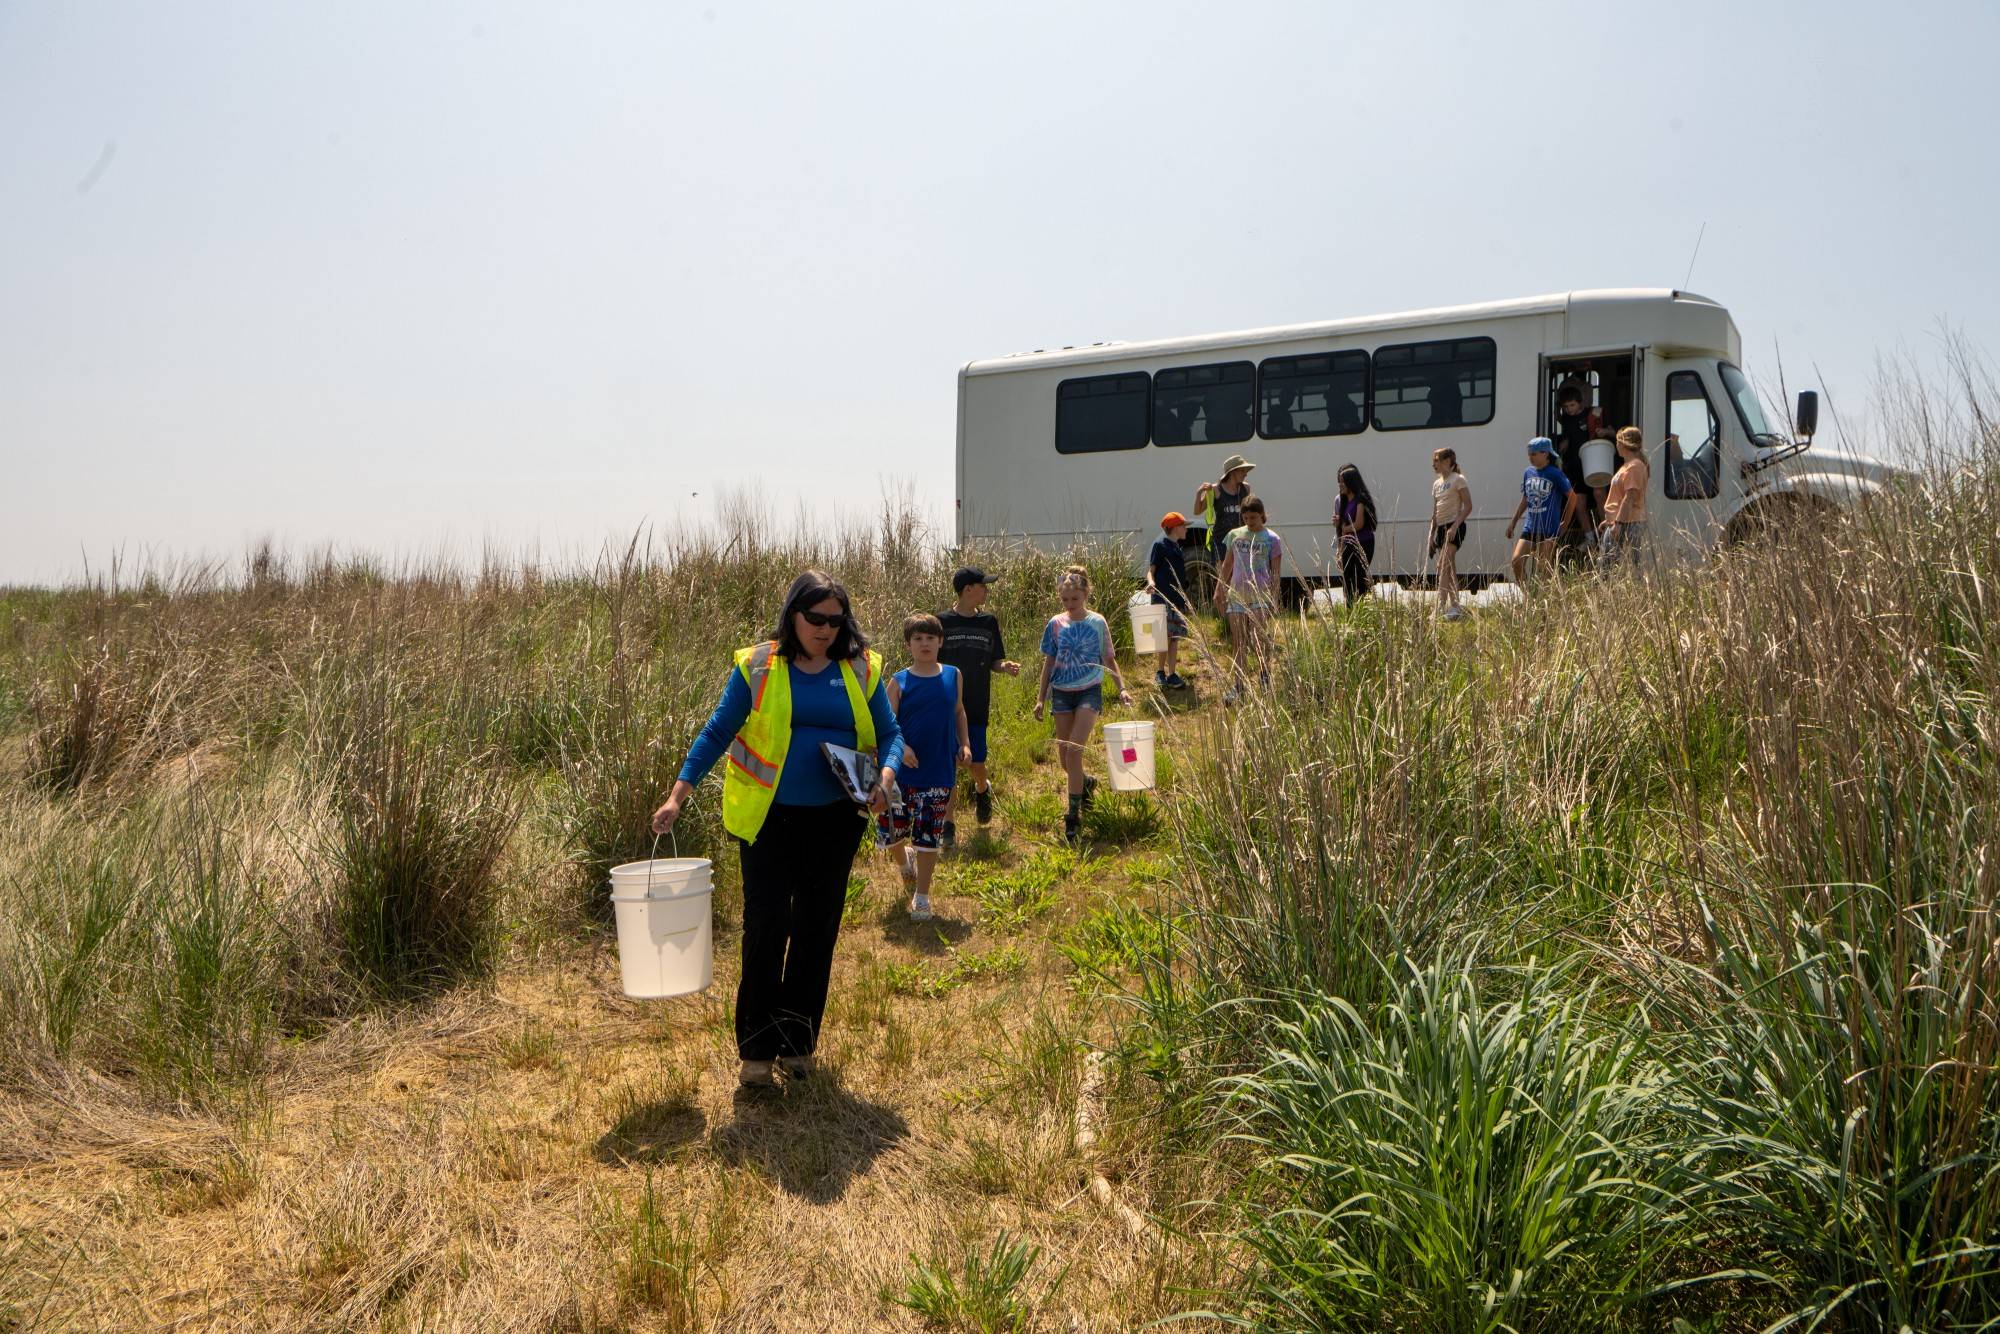 Senior Environmental Specialist Kristina Motley directs local grade school students on Poplar Island. Motley is collaborating with Dr. Roosenberg's team in an environmental education program called TERP (Terrapin Education and Research Partnership).